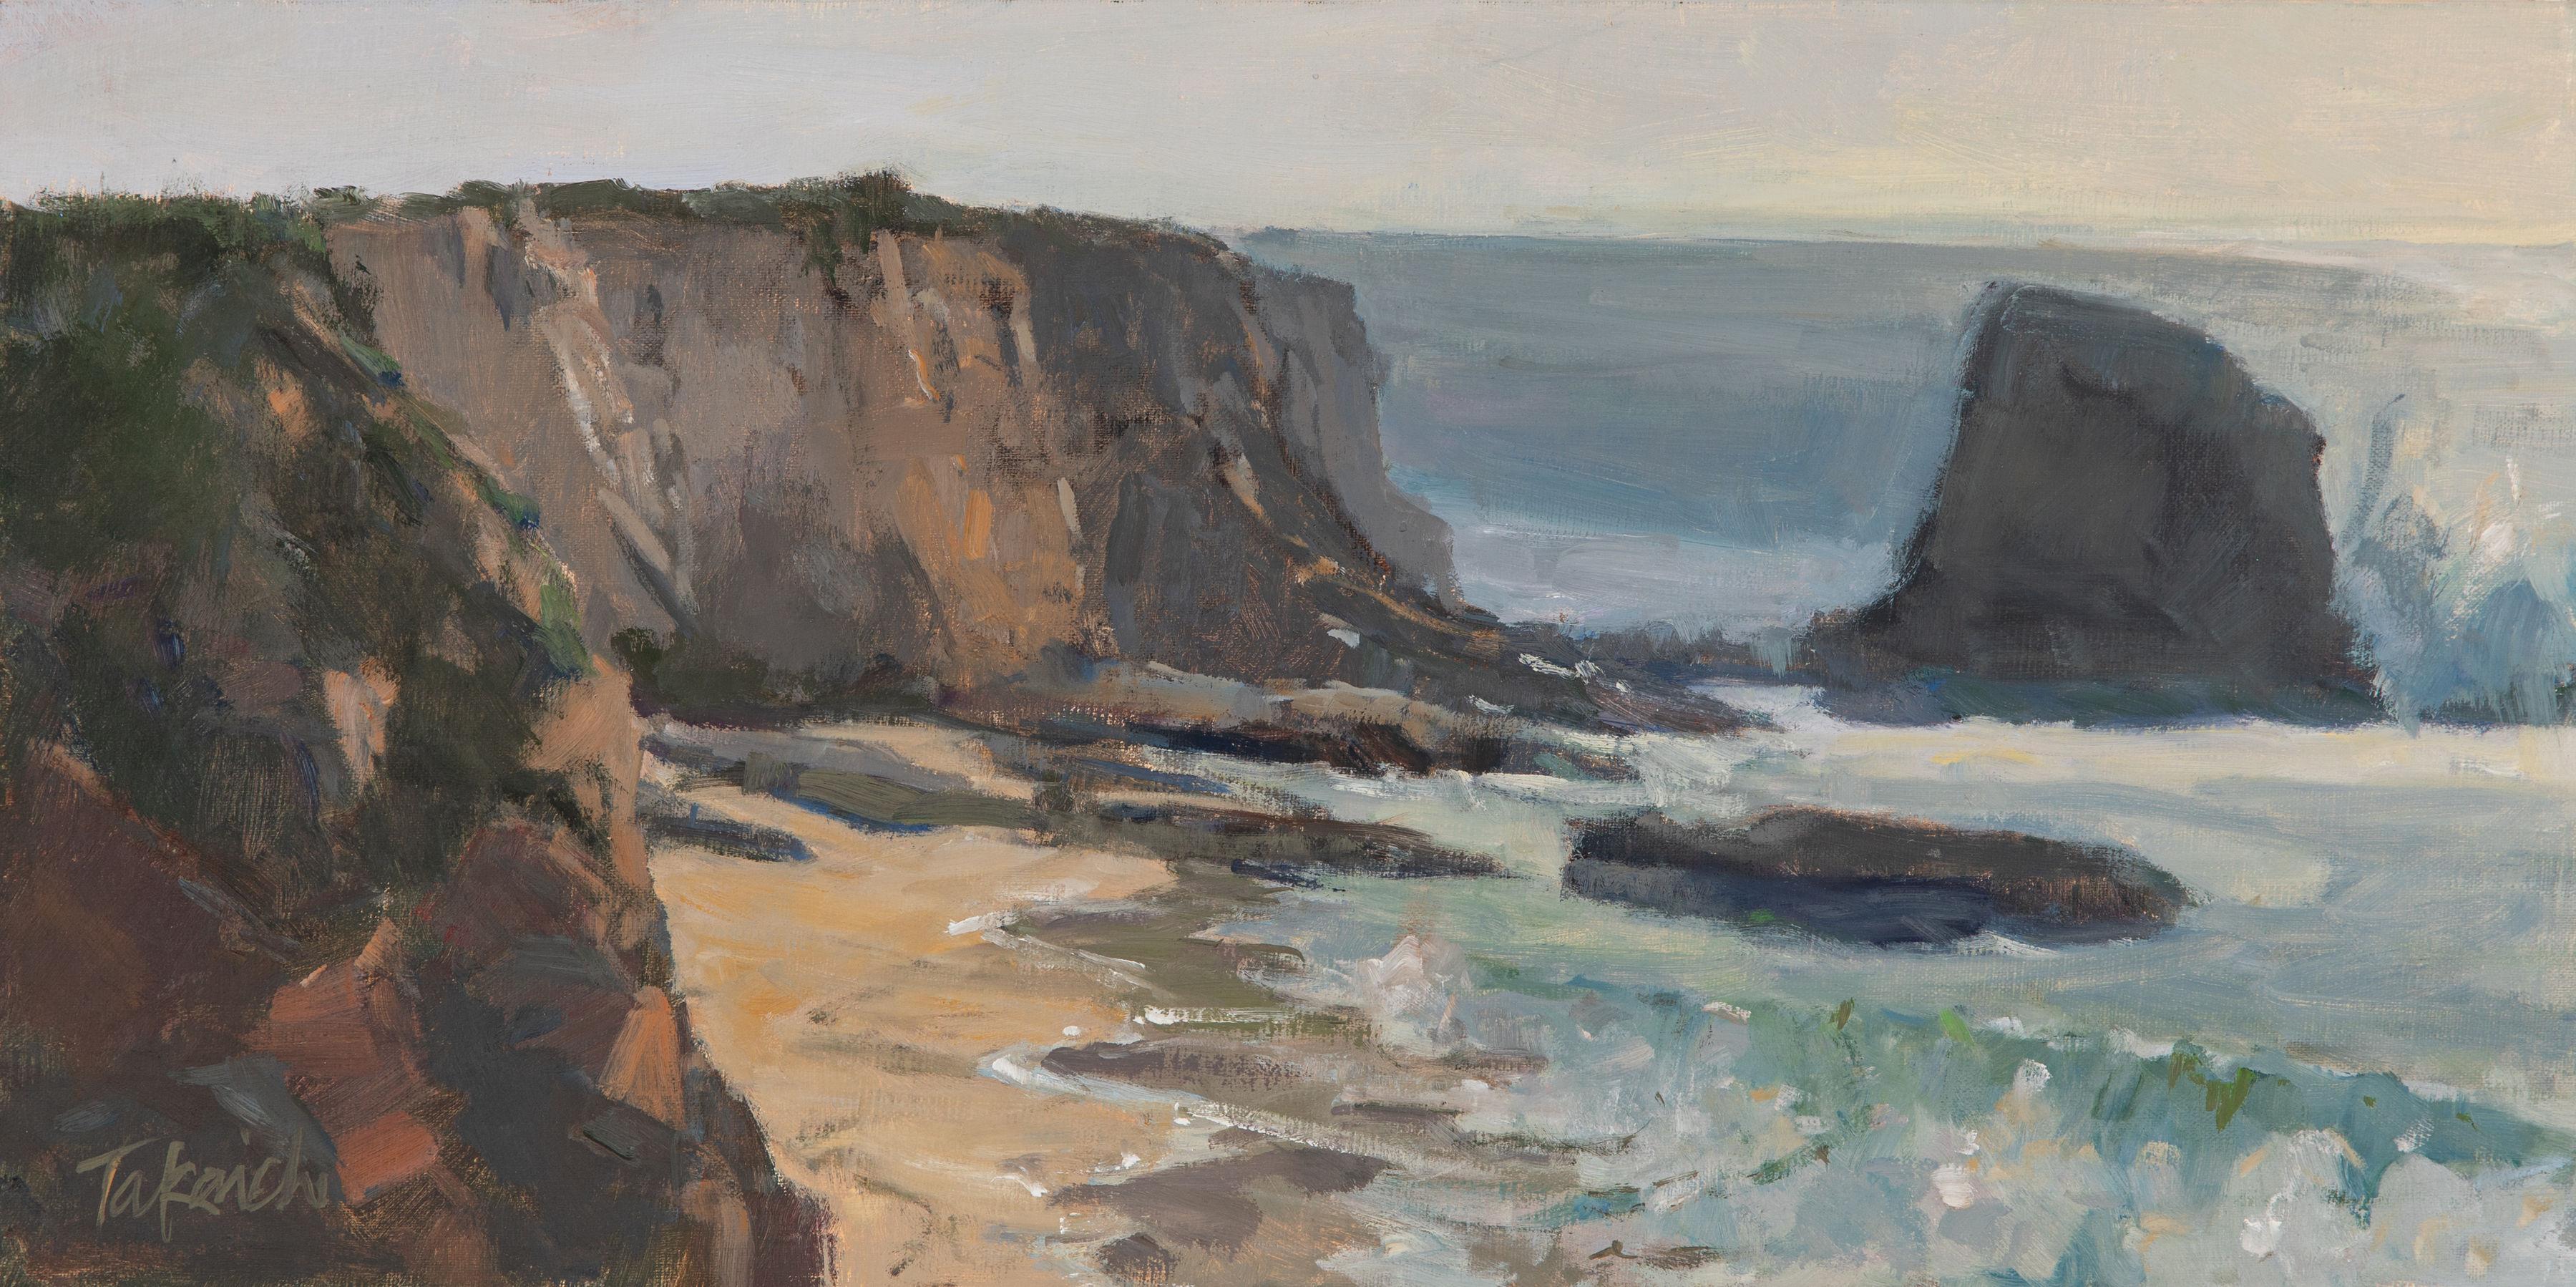 "The Sparkling Sea" a plein air oil painting of Panther Beach by Nancy Takaichi